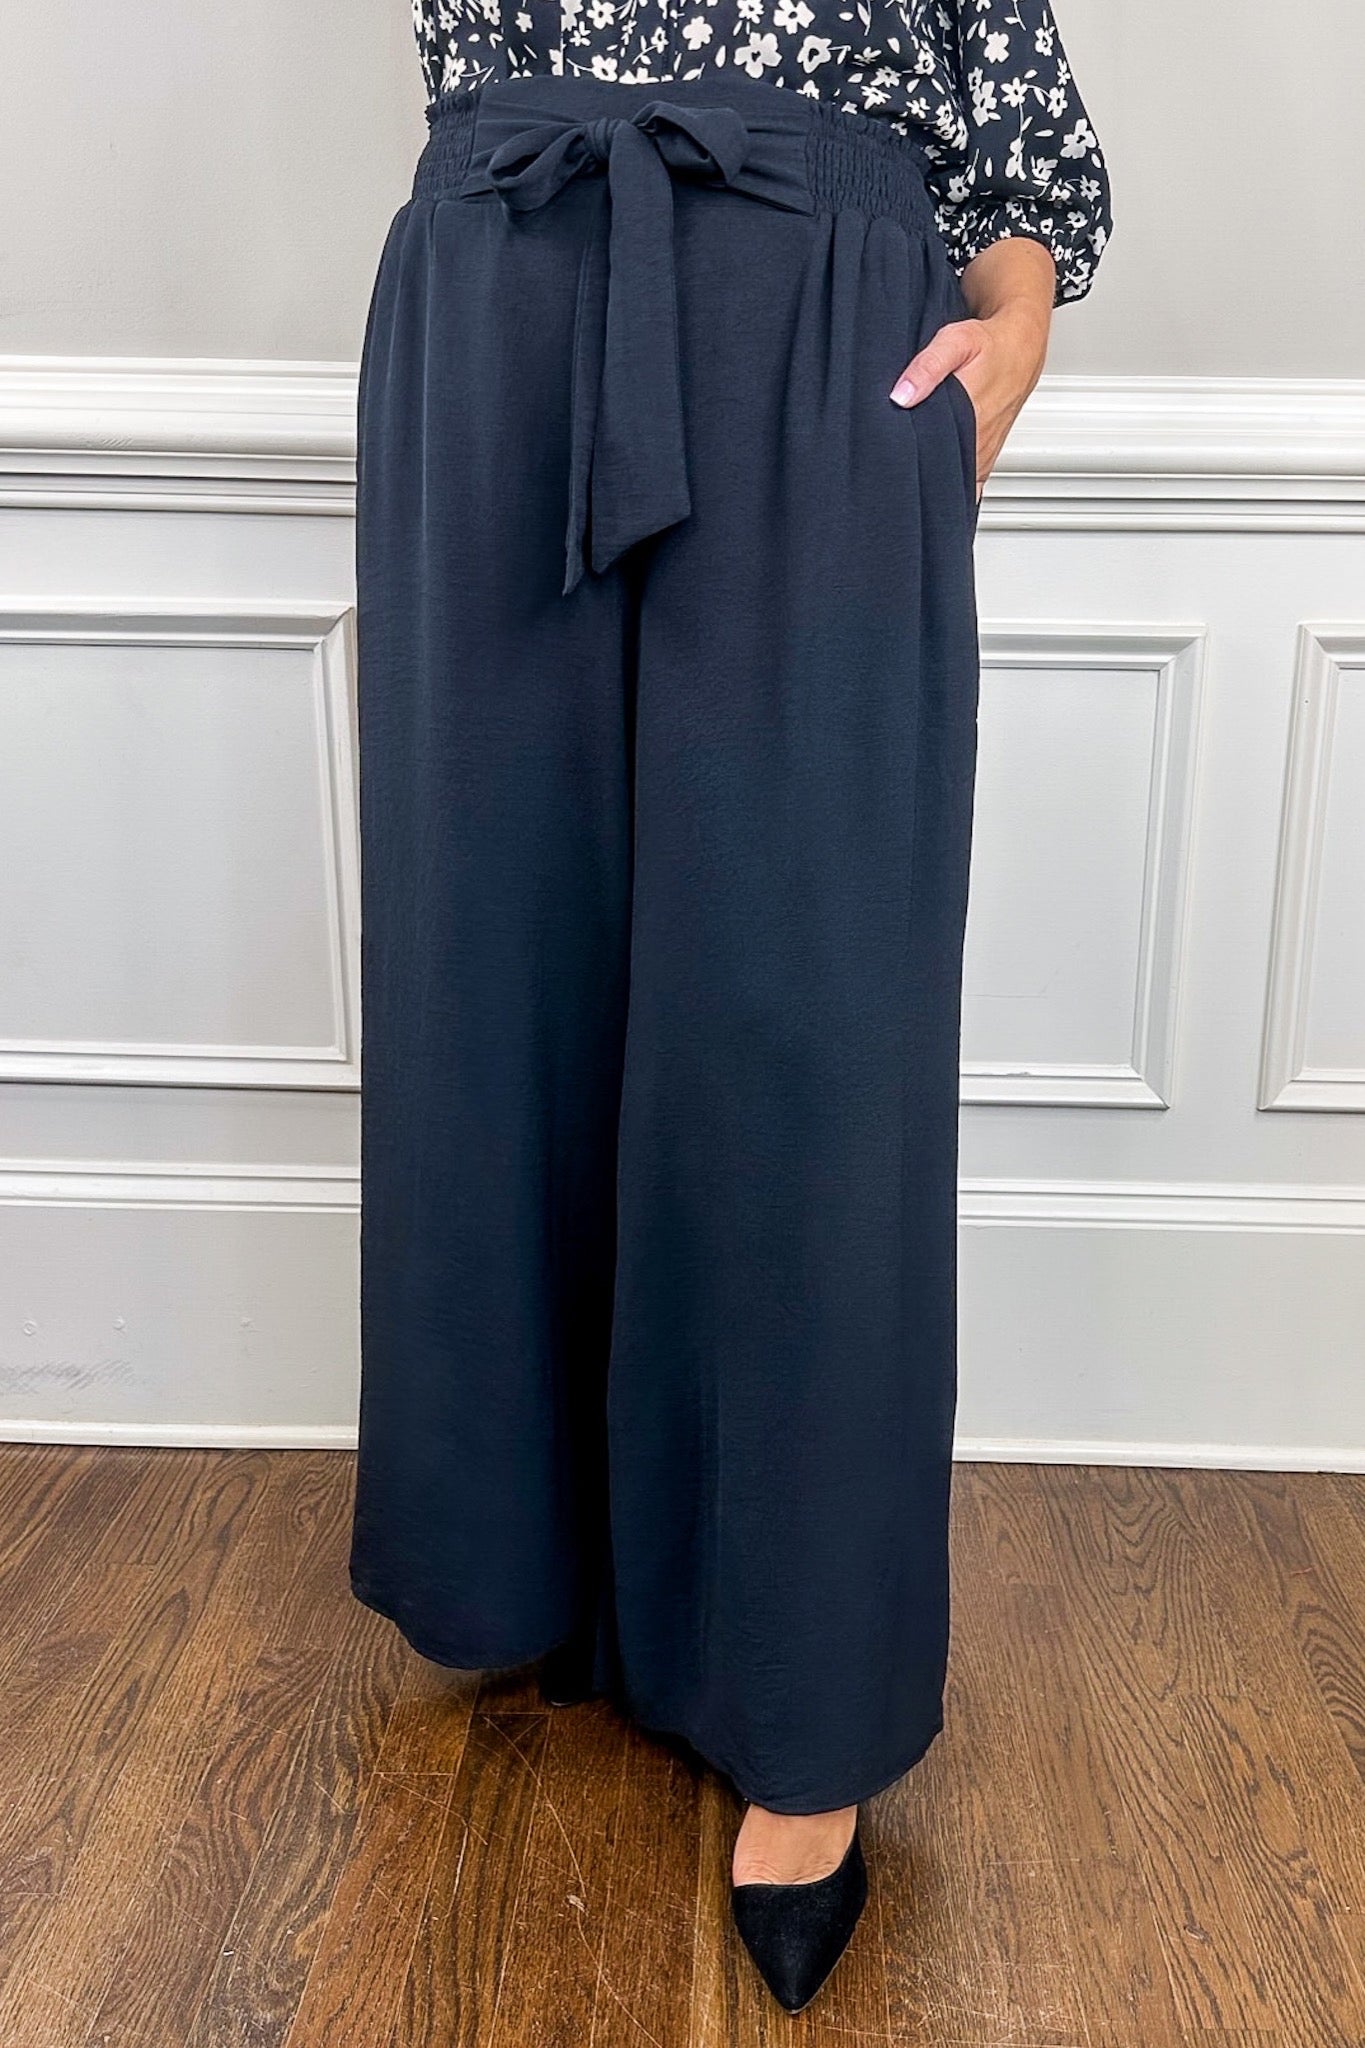 Fashionista NOW: How To Turn An Old Skirt Into Palazzo Pants?